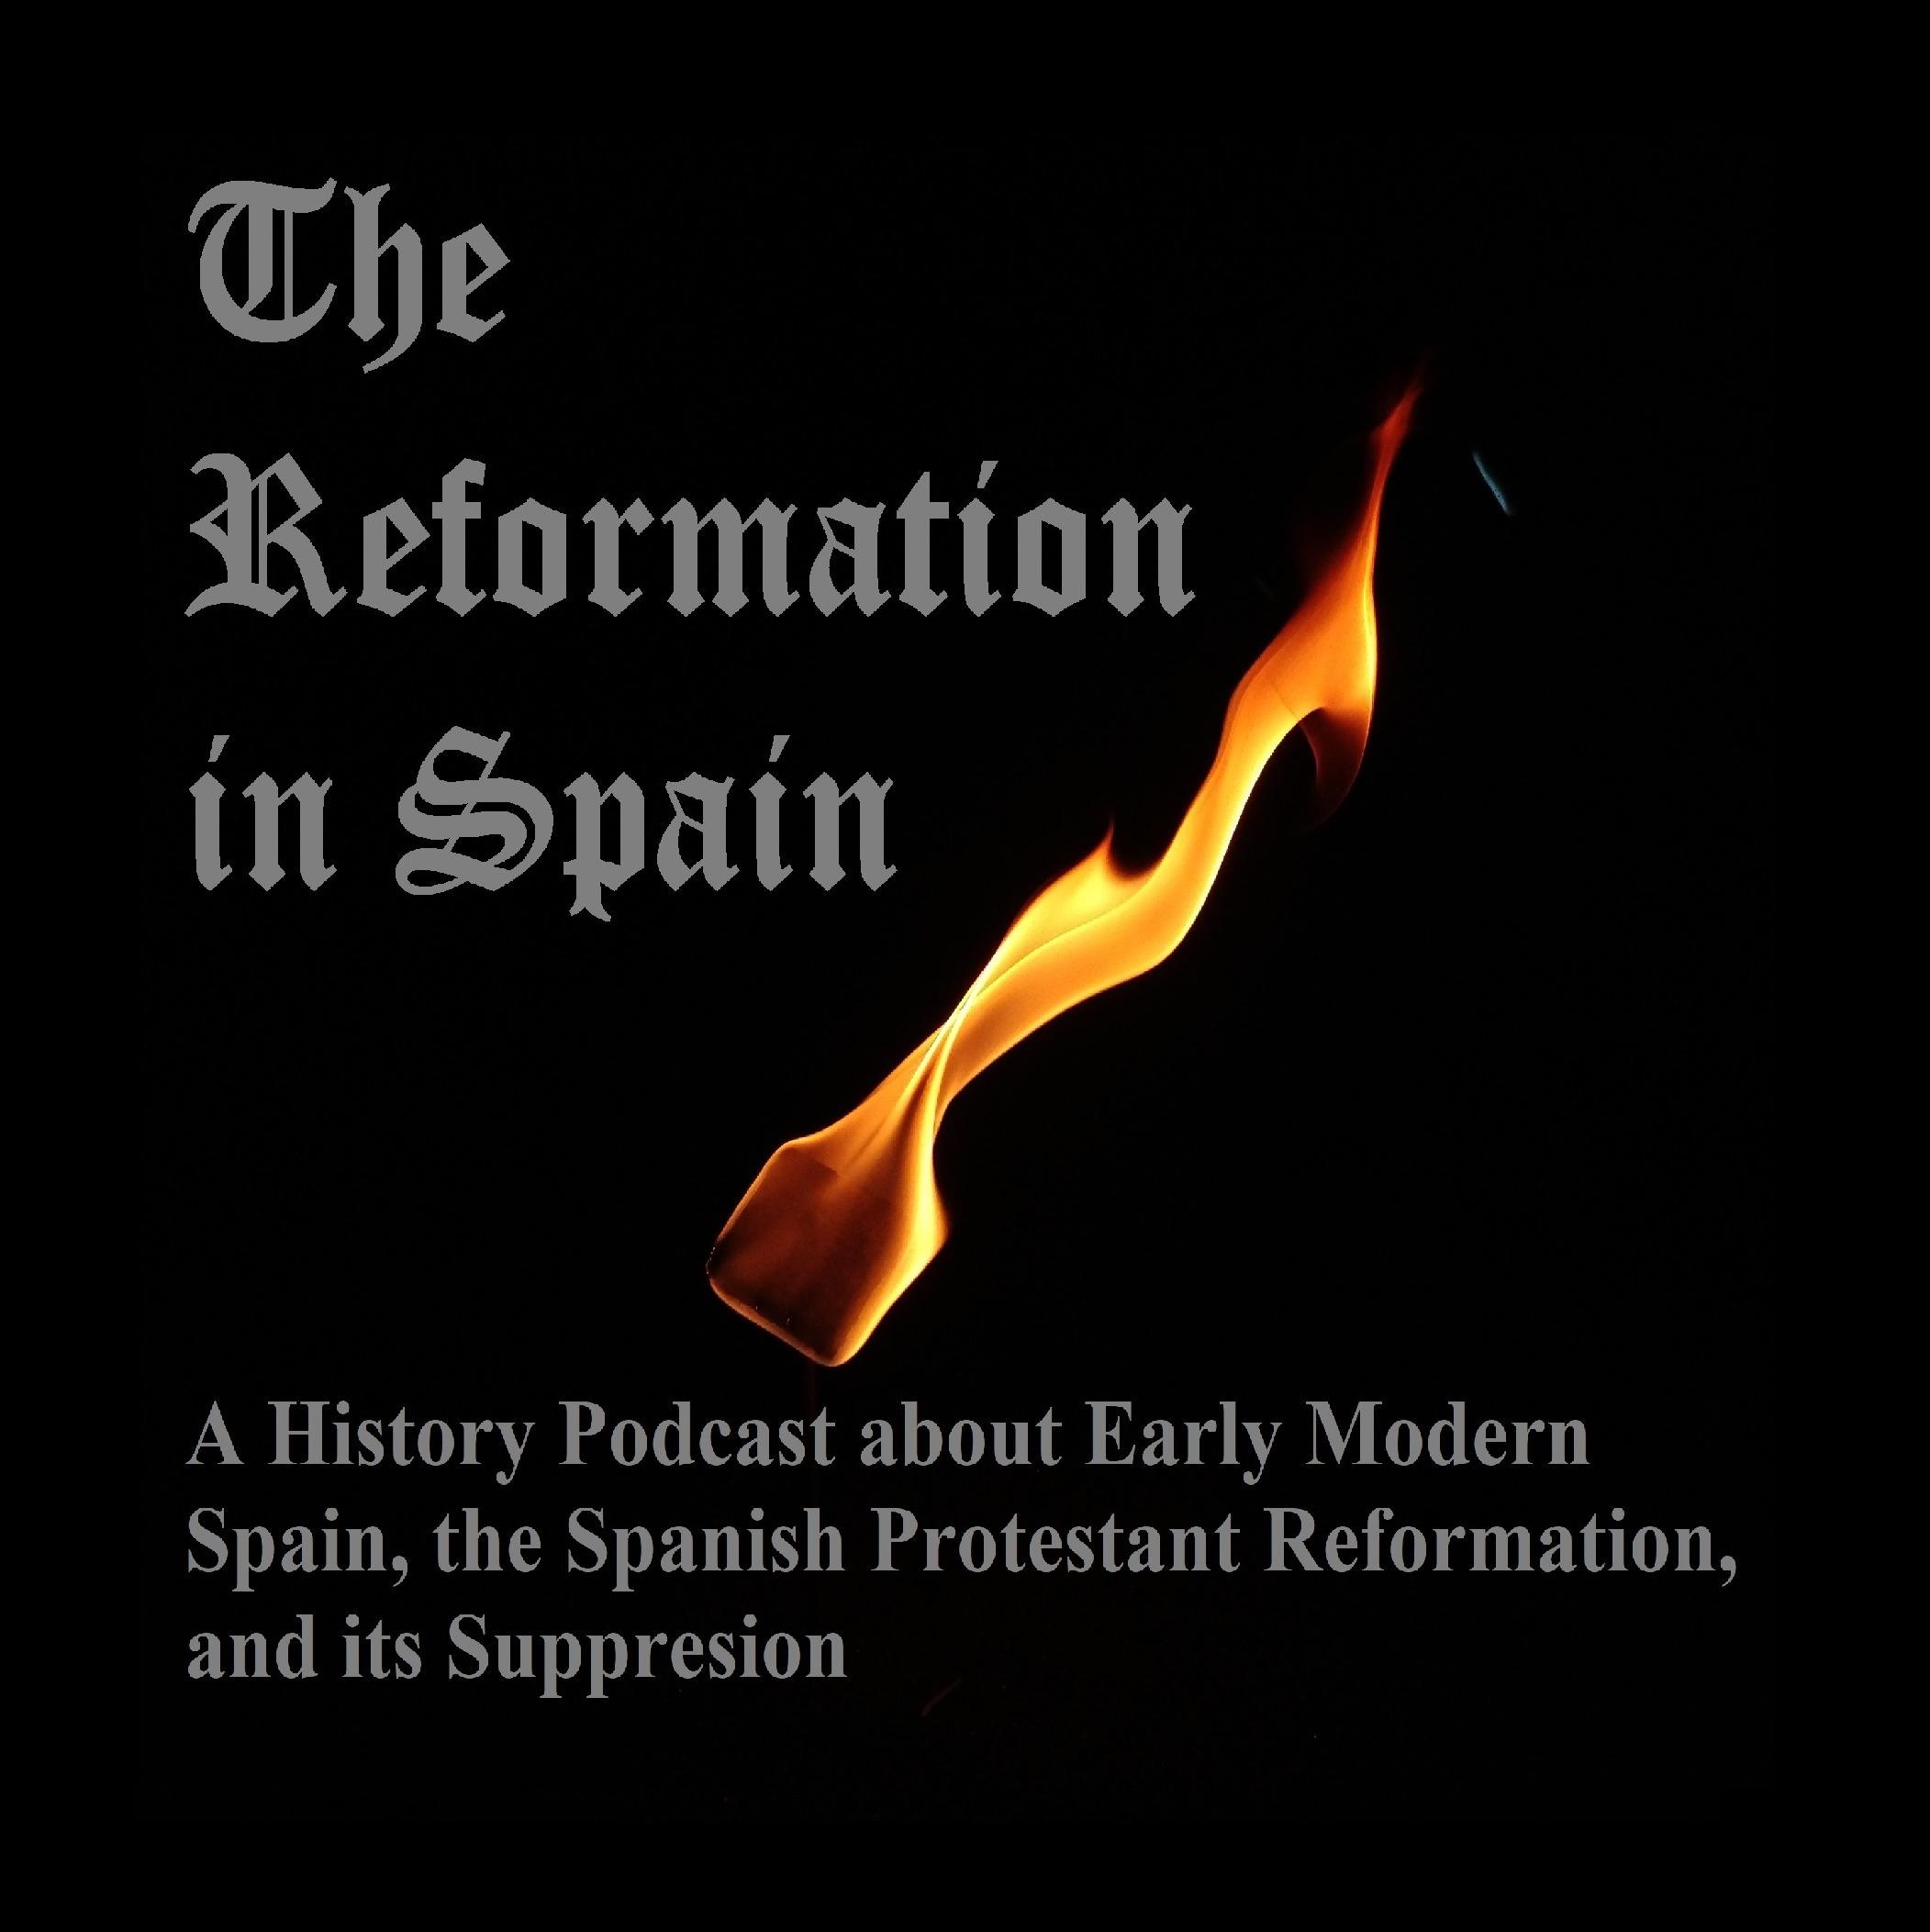 The Reformation in Spain